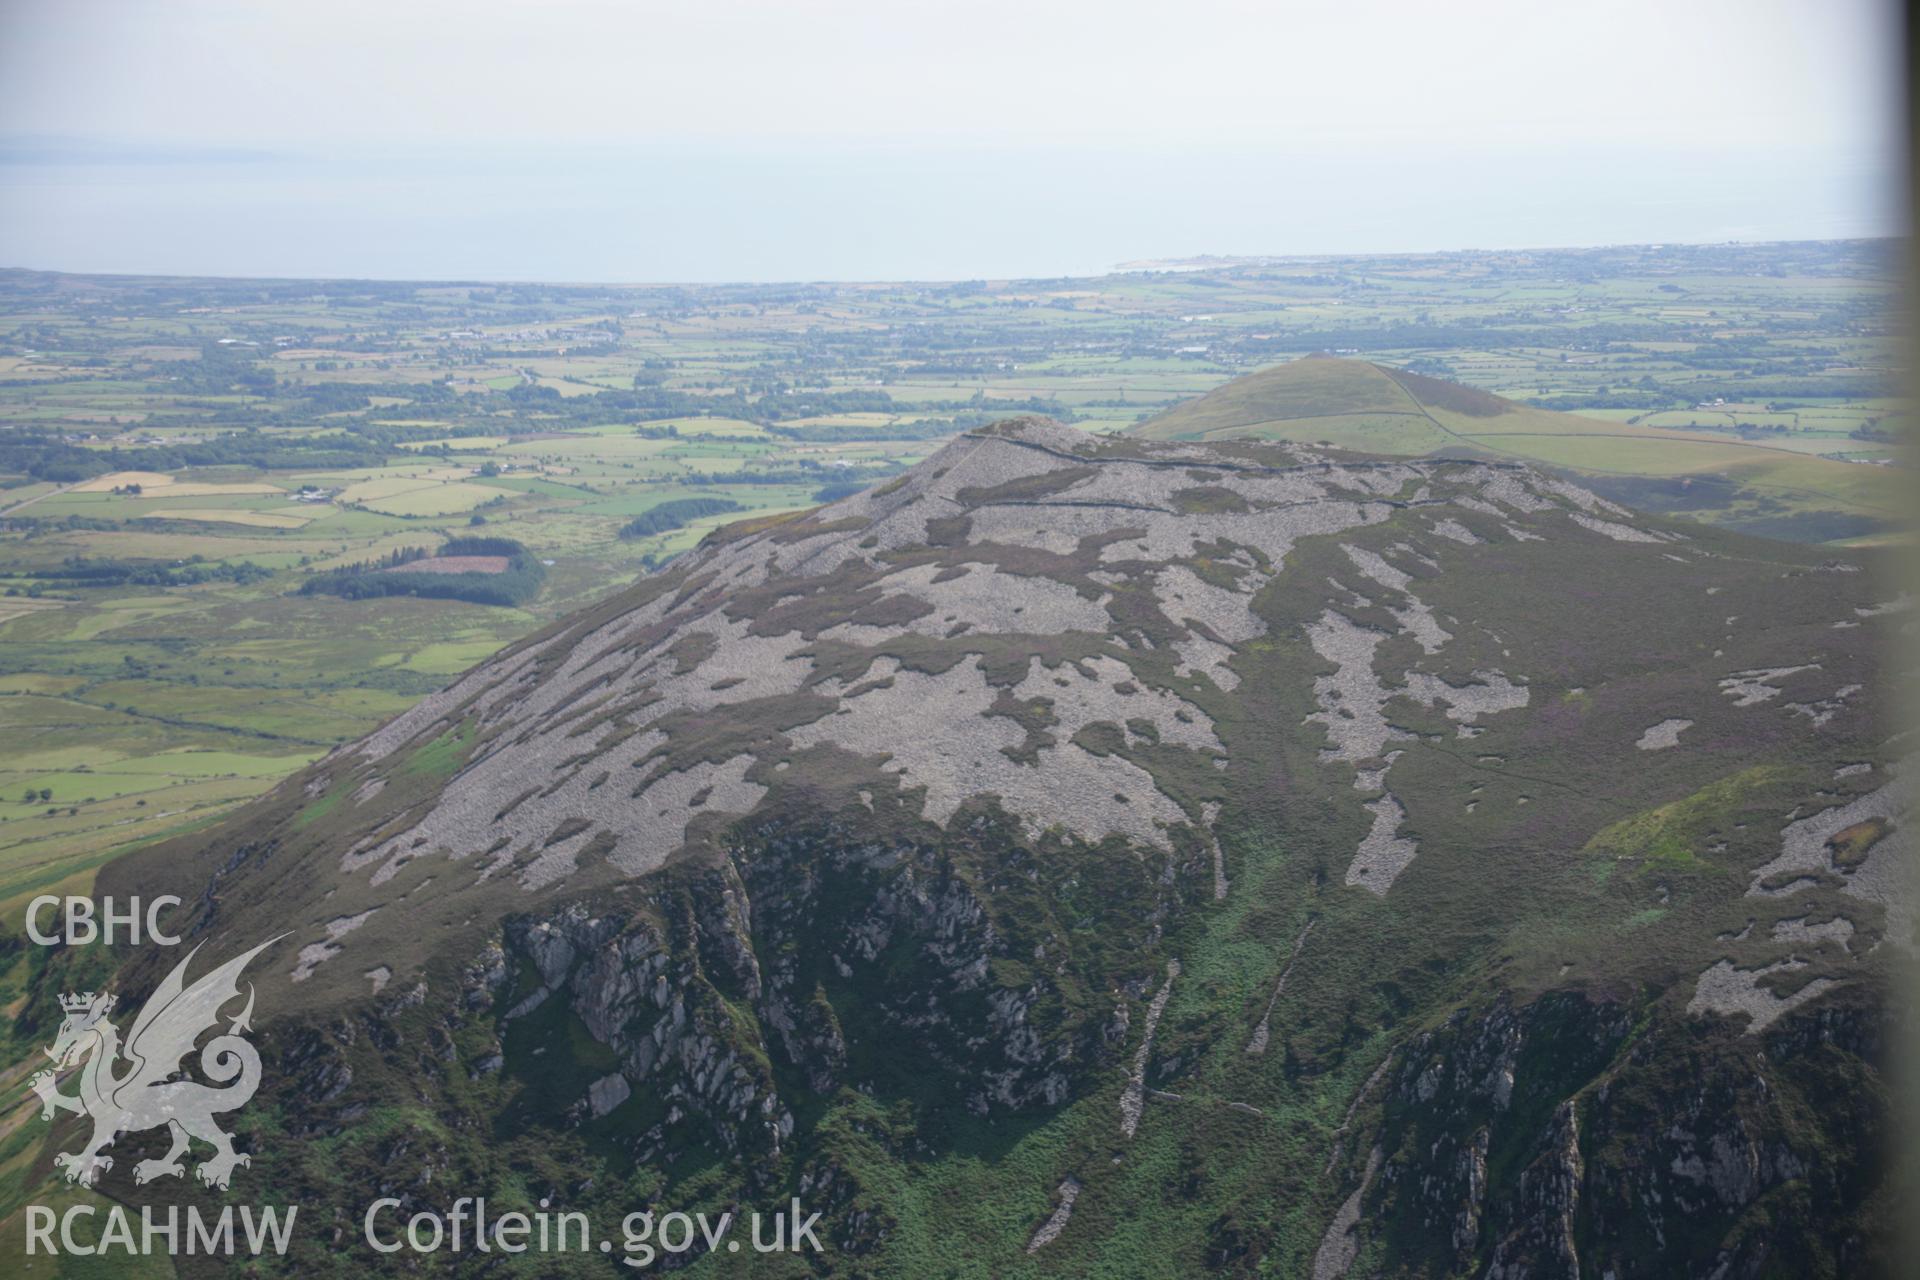 RCAHMW colour oblique aerial photograph of Tre'r Ceiri Fort, Llanaelhaearn. Taken on 25 July 2006 by Toby Driver.